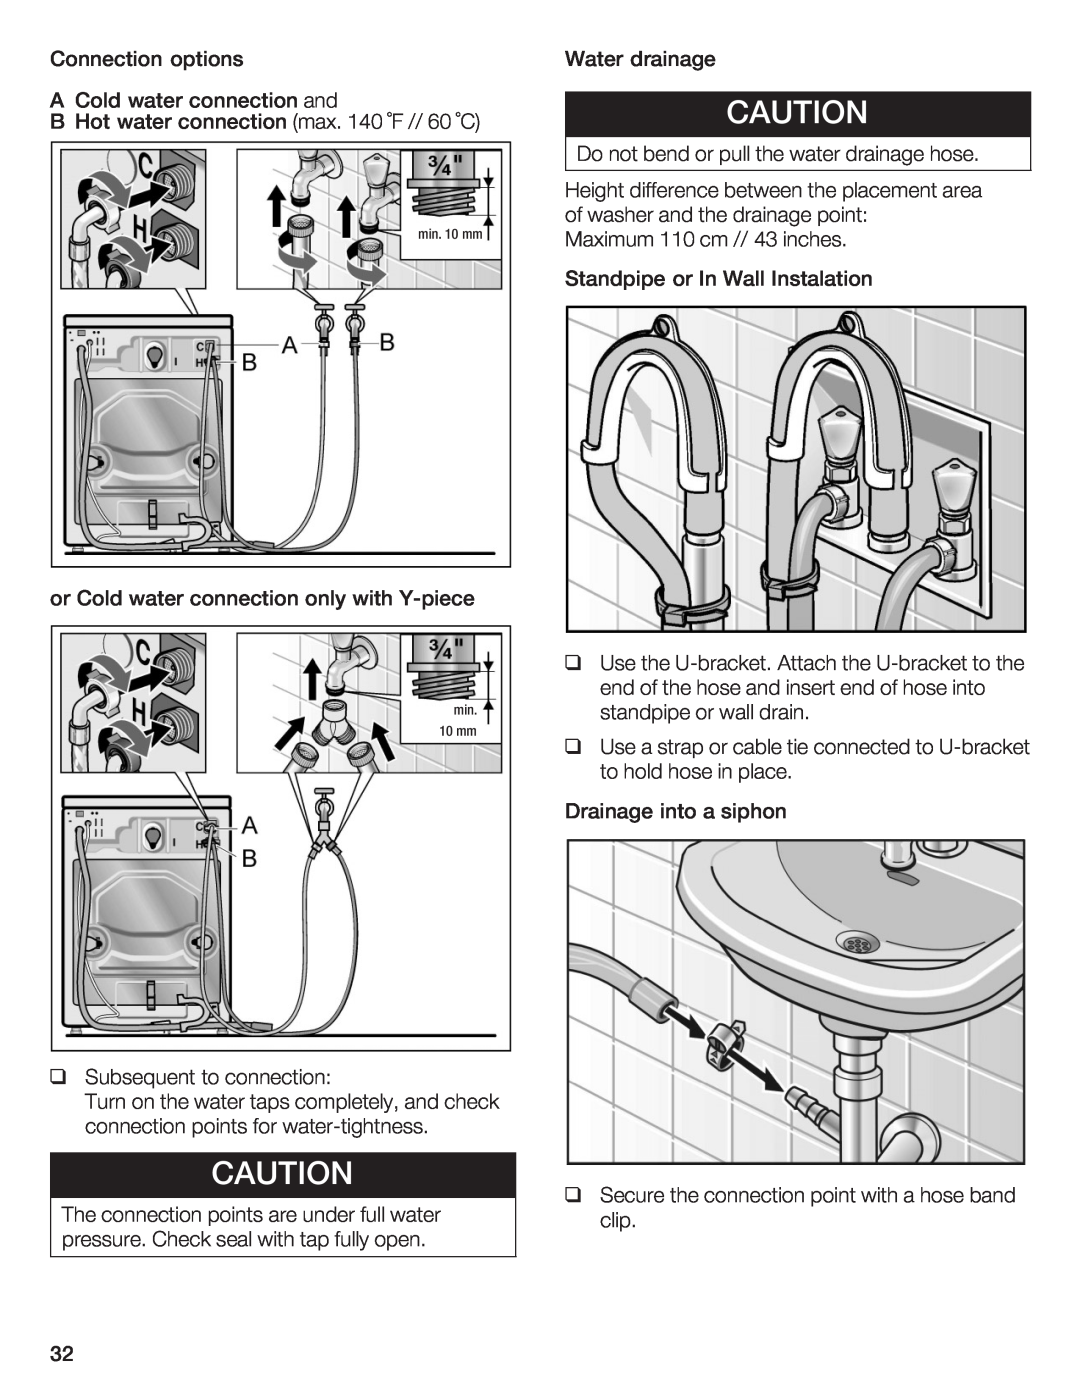 Bosch Appliances WFL 2060, WFL 2050 manual Cautin, Connection options A Cold water connectionand 